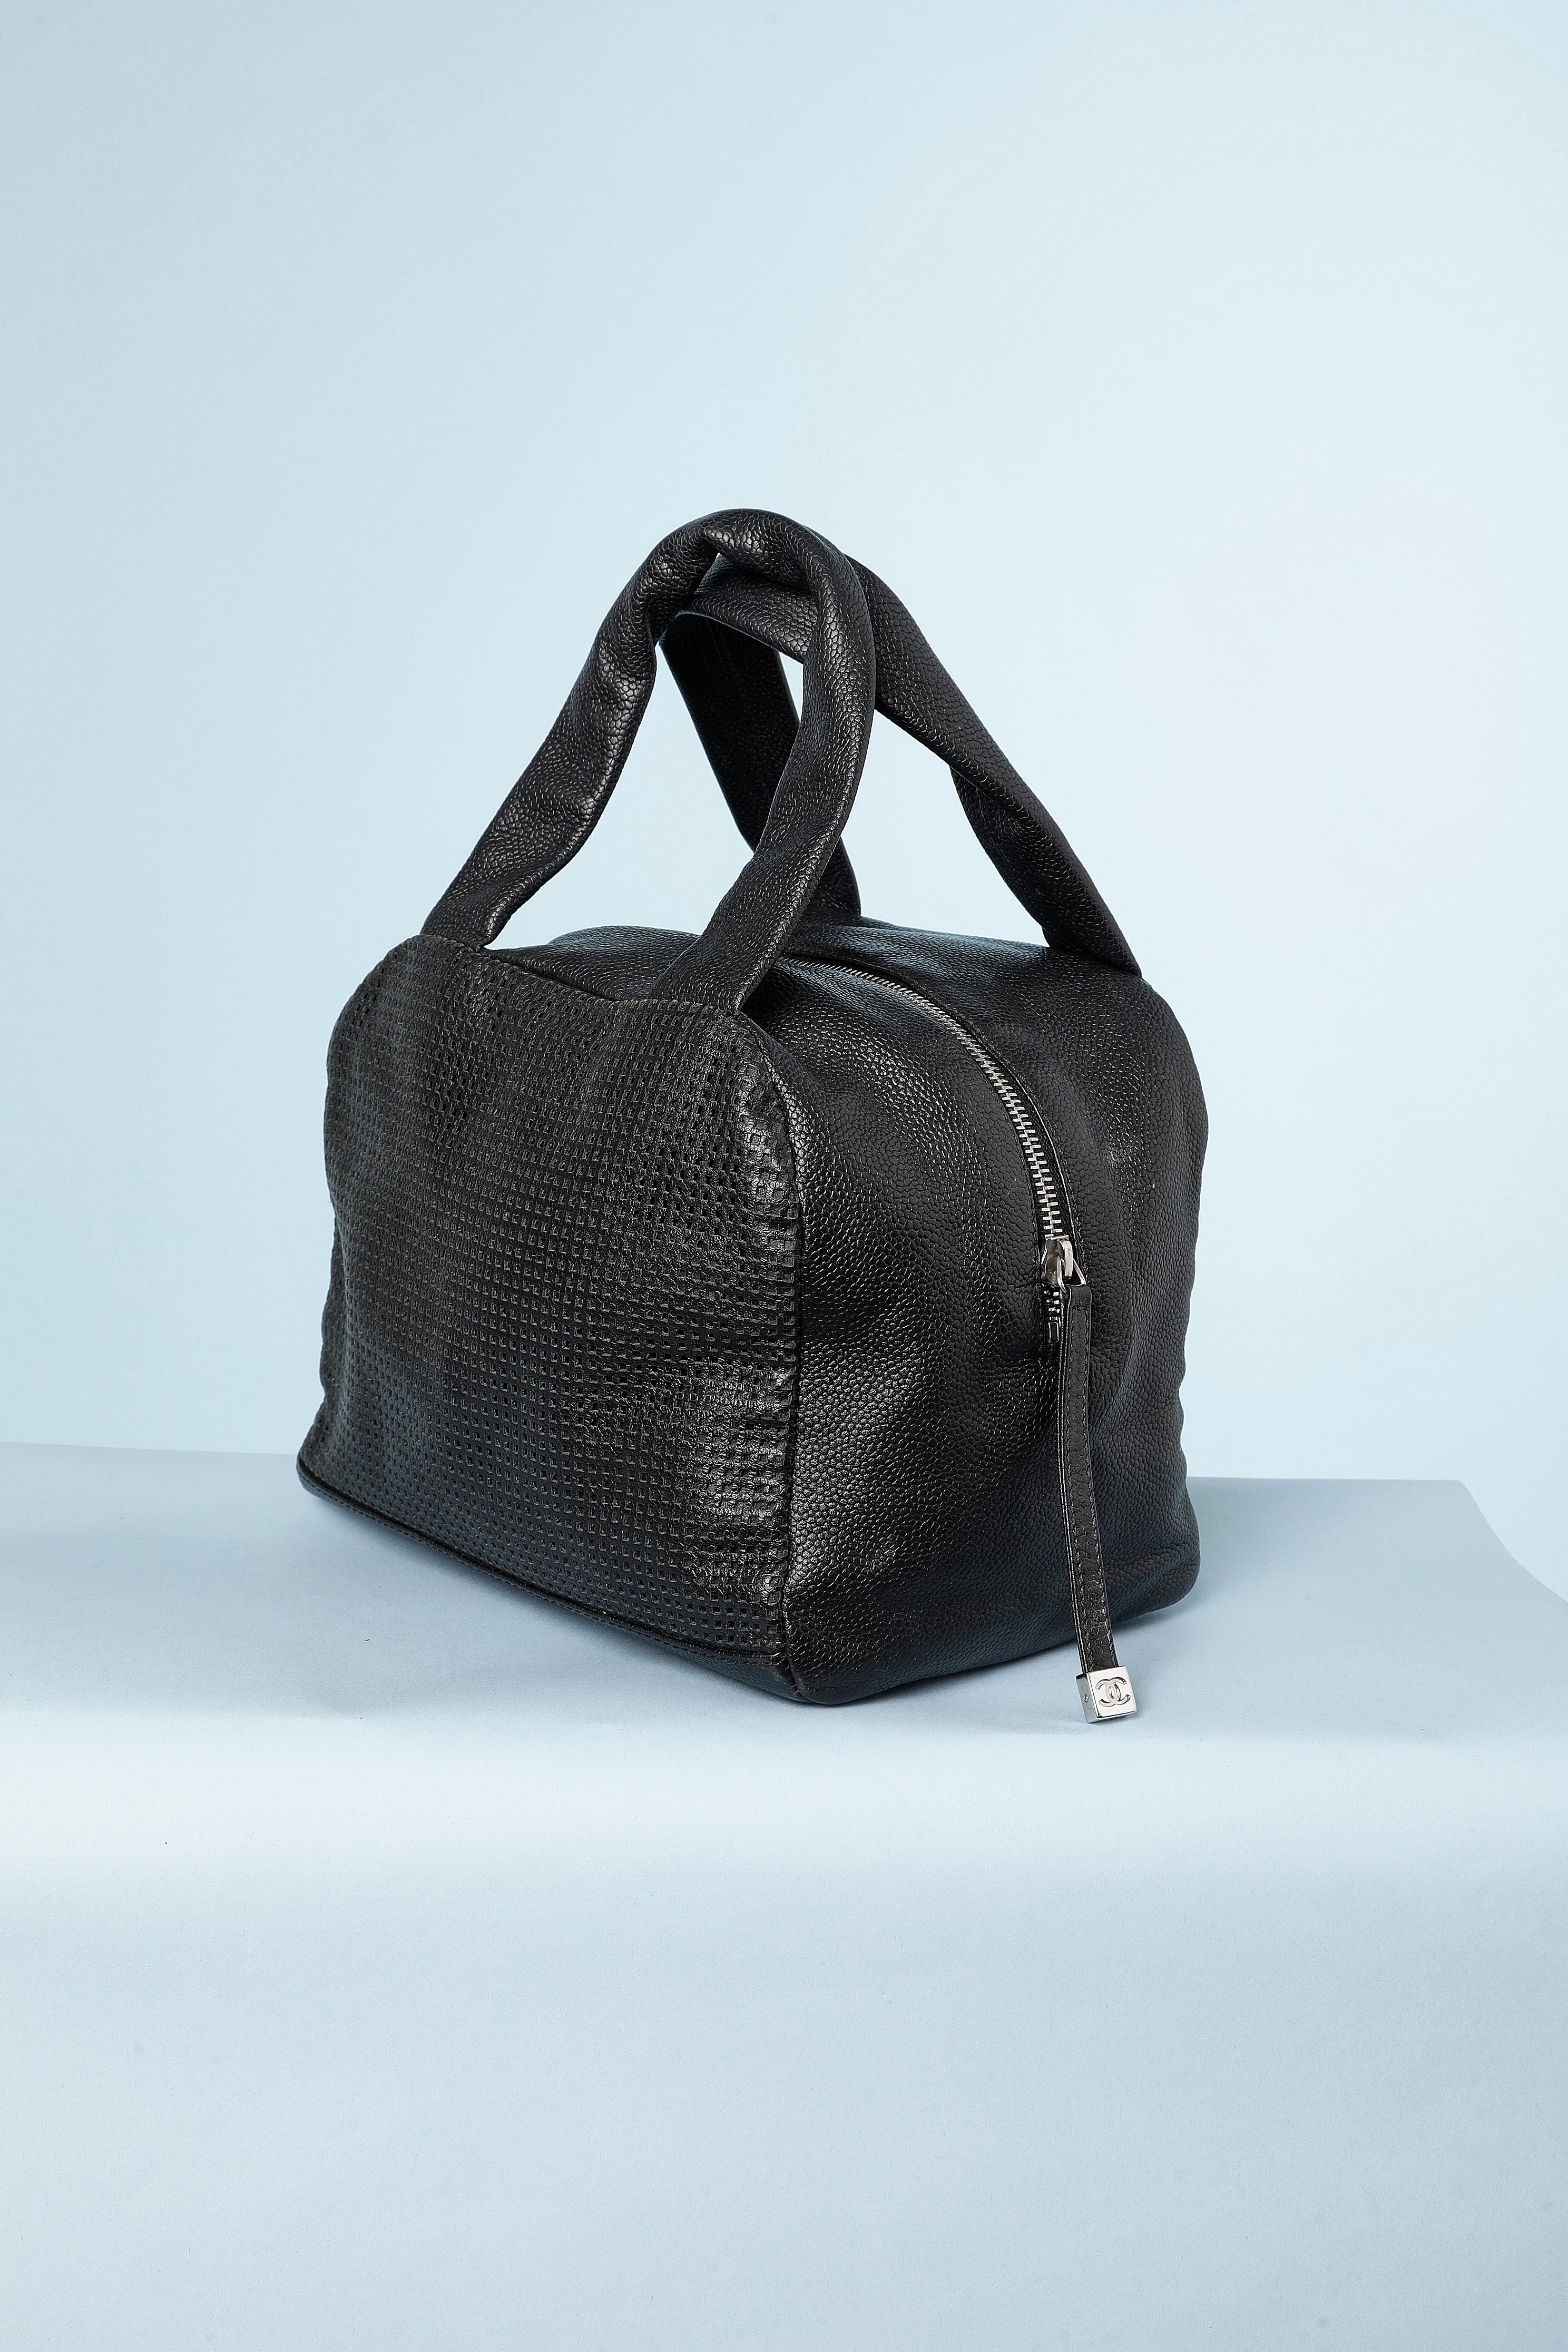 Black leather bag perforated with double C and zip . Numbered: 9579105
Branded fabric lining. 
Size: 
- Height= 17 cm
- Width= 21 cm
- Depth = 16 cm
Protection studs under the bag.